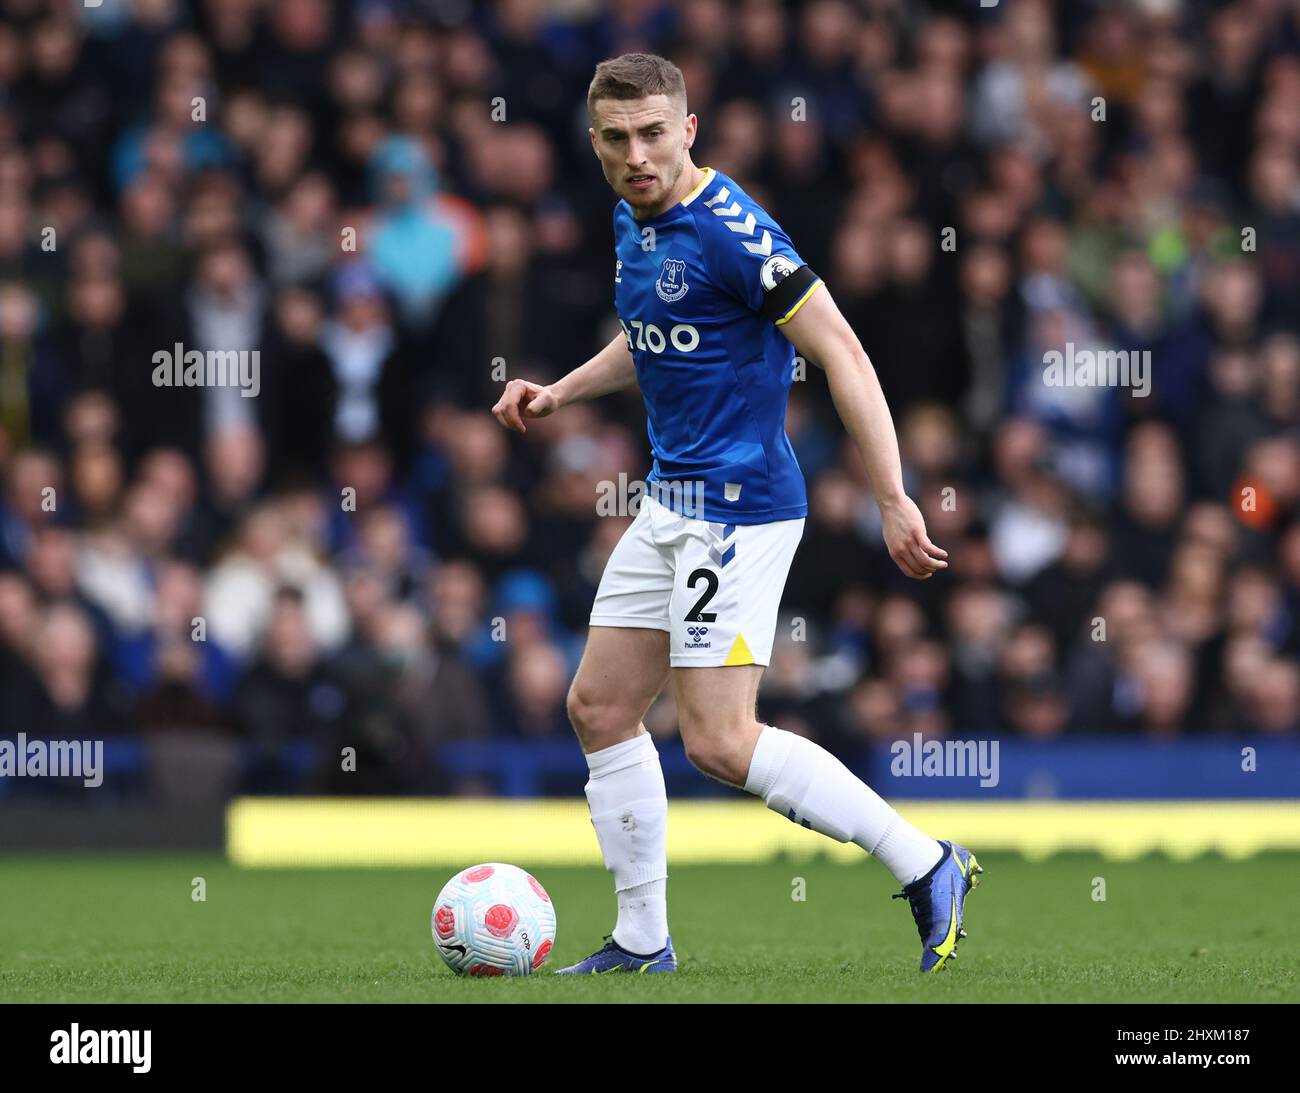 Liverpool, England, 13th March 2022.  Jonjoe Kenny of Everton  during the Premier League match at Goodison Park, Liverpool. Picture credit should read: Darren Staples / Sportimage Stock Photo